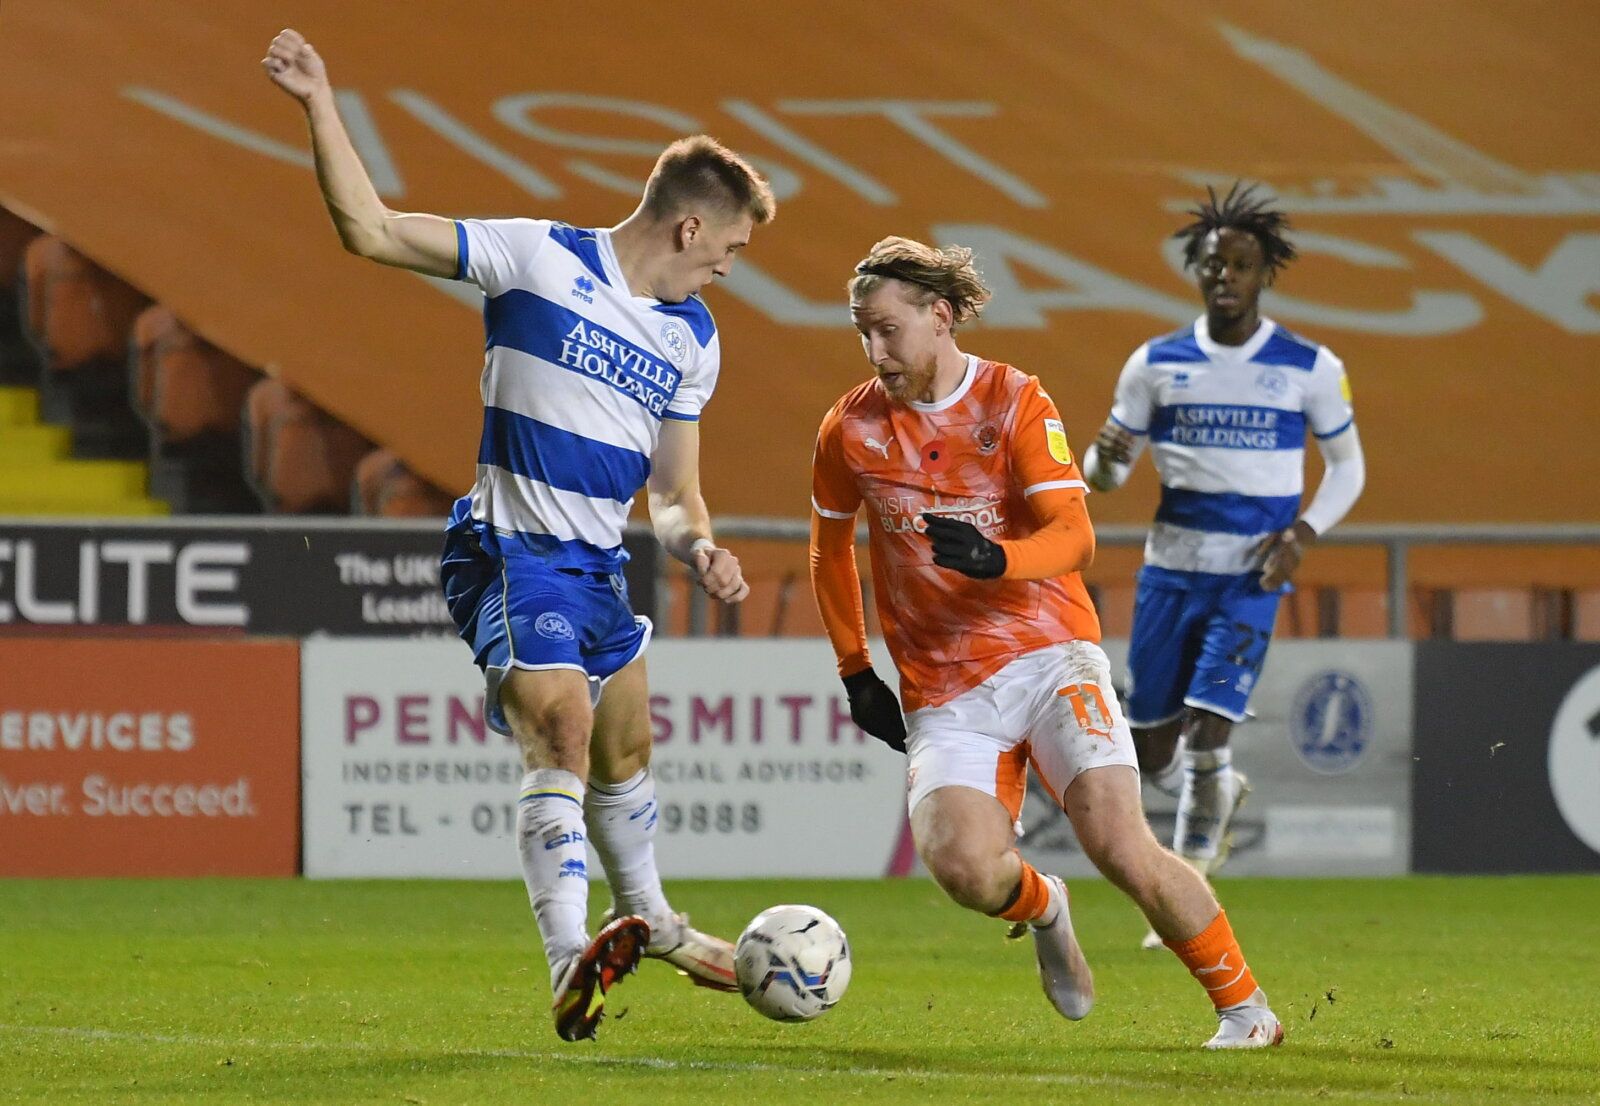 Soccer Football - Championship - Blackpool v Queens Park Rangers - Bloomfield Road, Blackpool, Britain - November 6, 2021 Blackpool's Josh Bowler in action  Action Images/Paul Burrows  EDITORIAL USE ONLY. No use with unauthorized audio, video, data, fixture lists, club/league logos or 